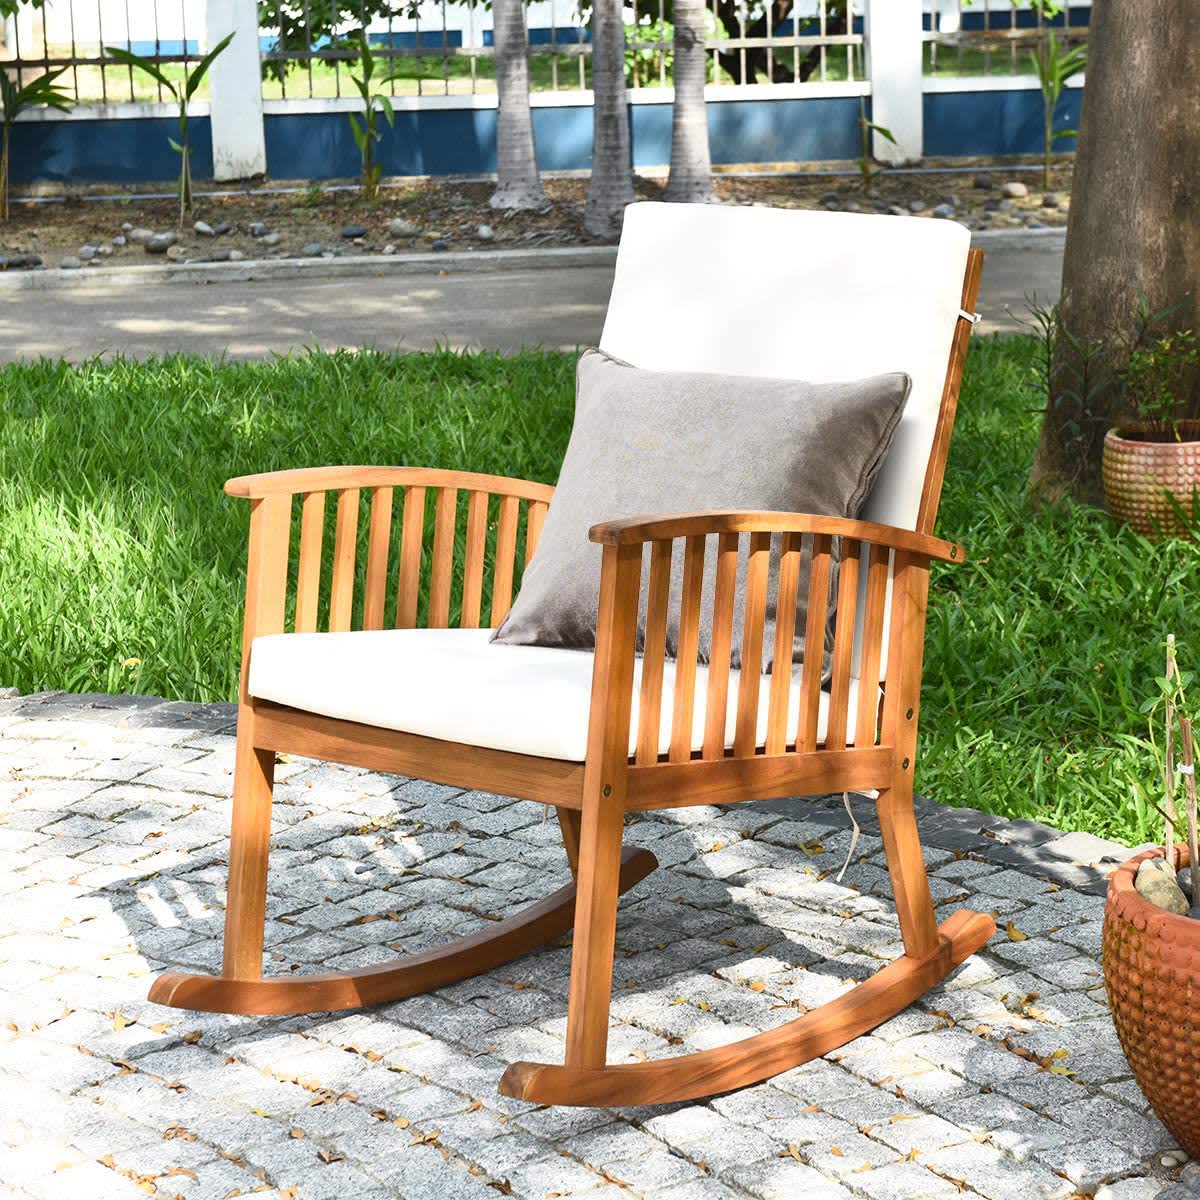 https://cdn.apartmenttherapy.info/image/upload/v1651766094/gen-workflow/product-database/tangkula-acacia-outdoor-tocking-chair-amazon.jpg